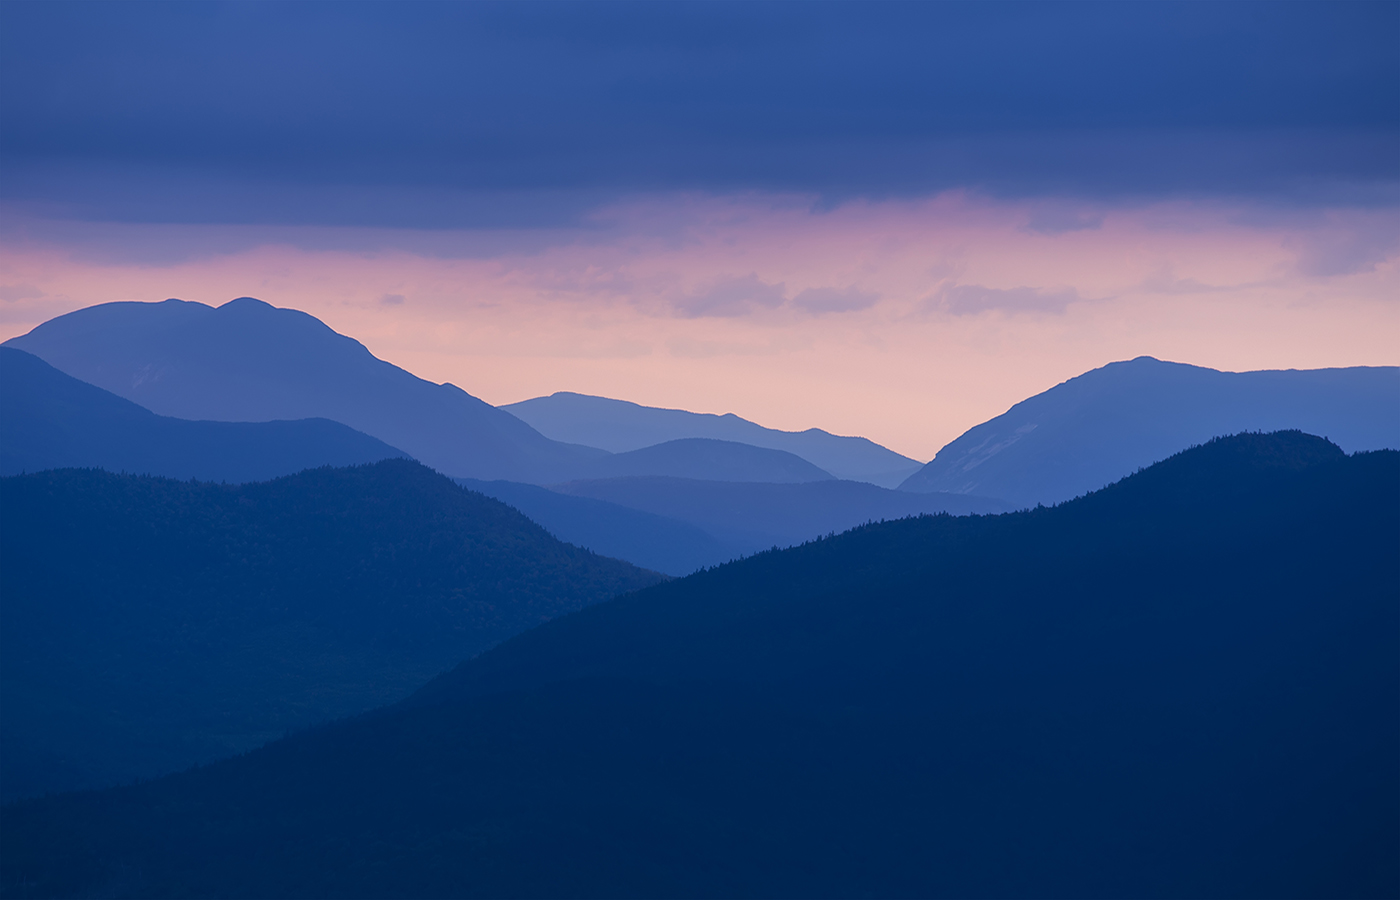 White Mountain Image By Chris Whiton Photography New Hampshire